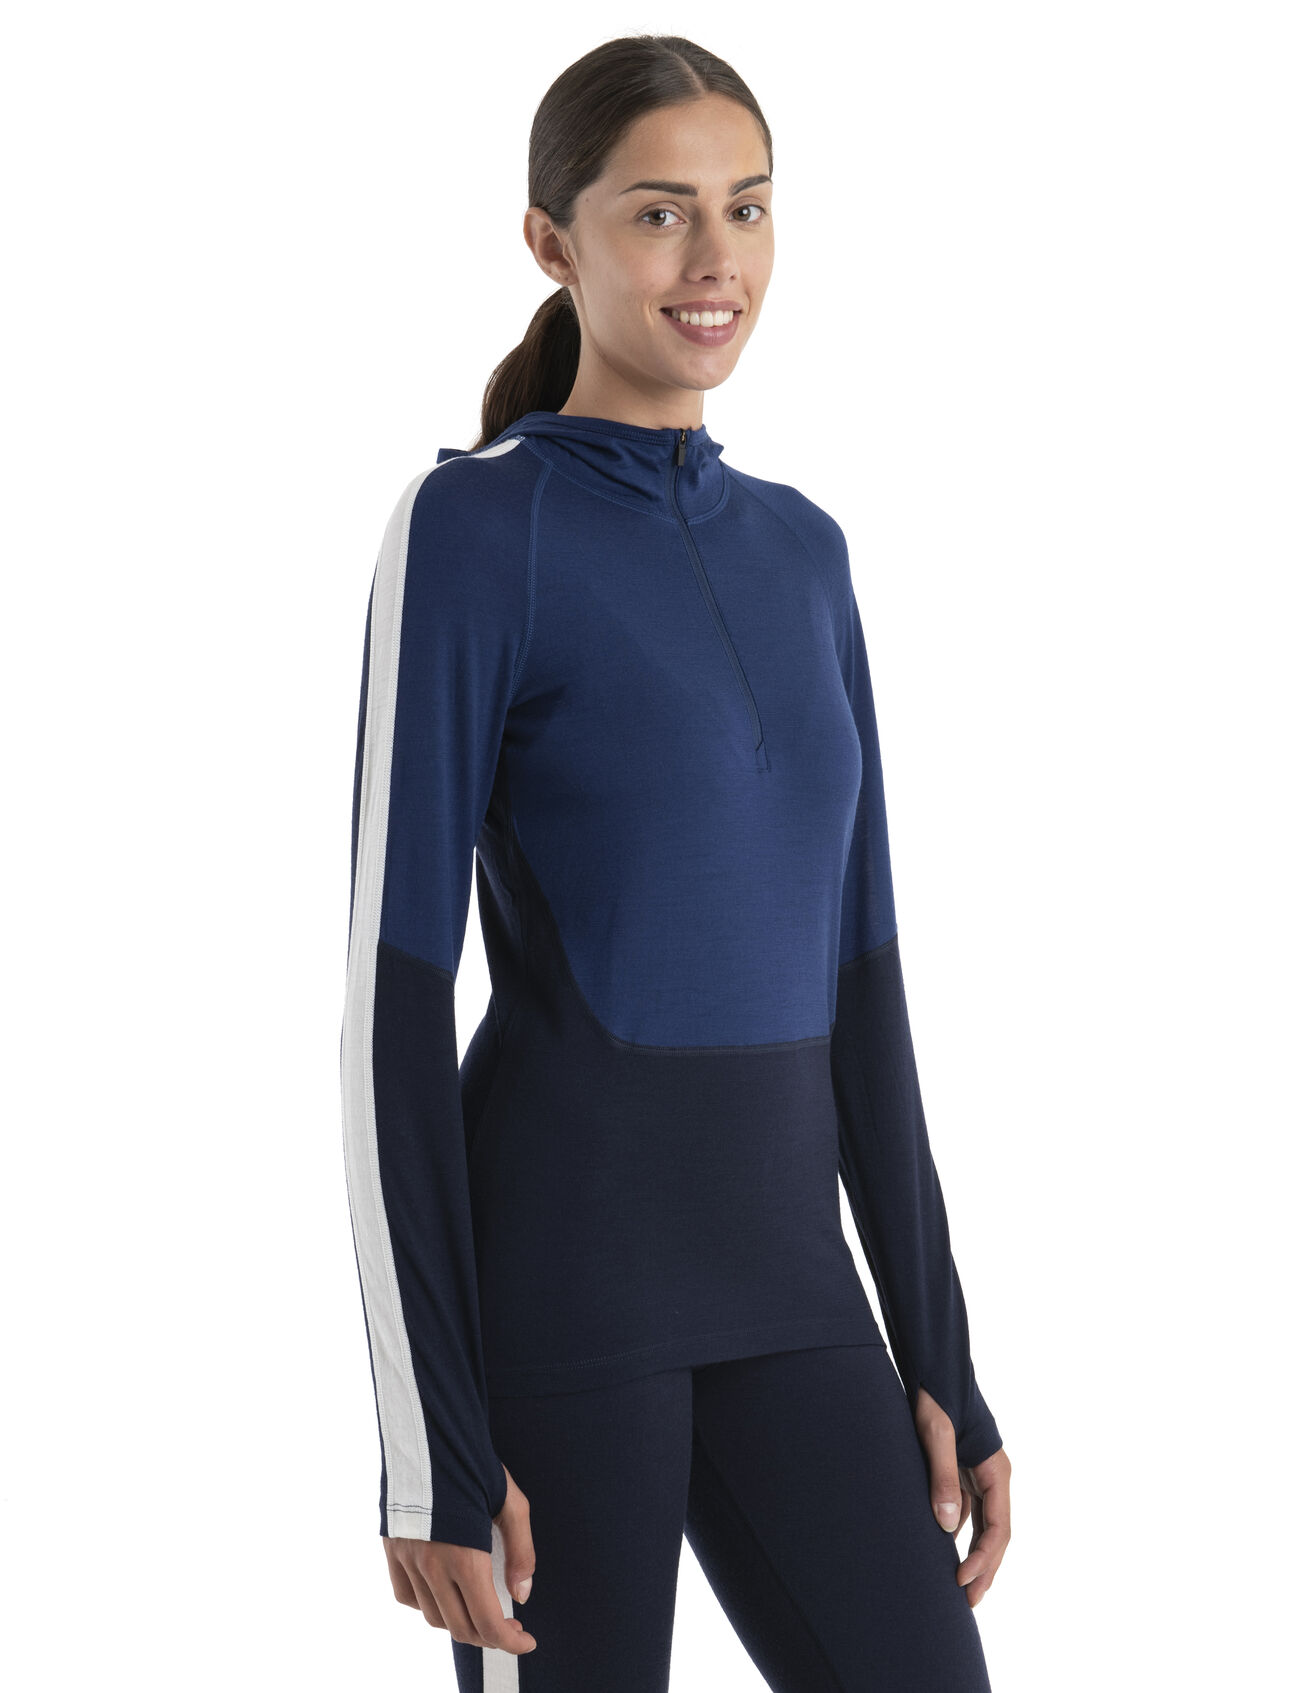 Womens Merino 200 Sonebula Long Sleeve Half Zip Thermal Hood Featuring our most versatile merino jersey fabric, the 200 Sonebula Long Sleeve Half Zip Hood is a technical base layer that provides ample warmth whatever the activity.